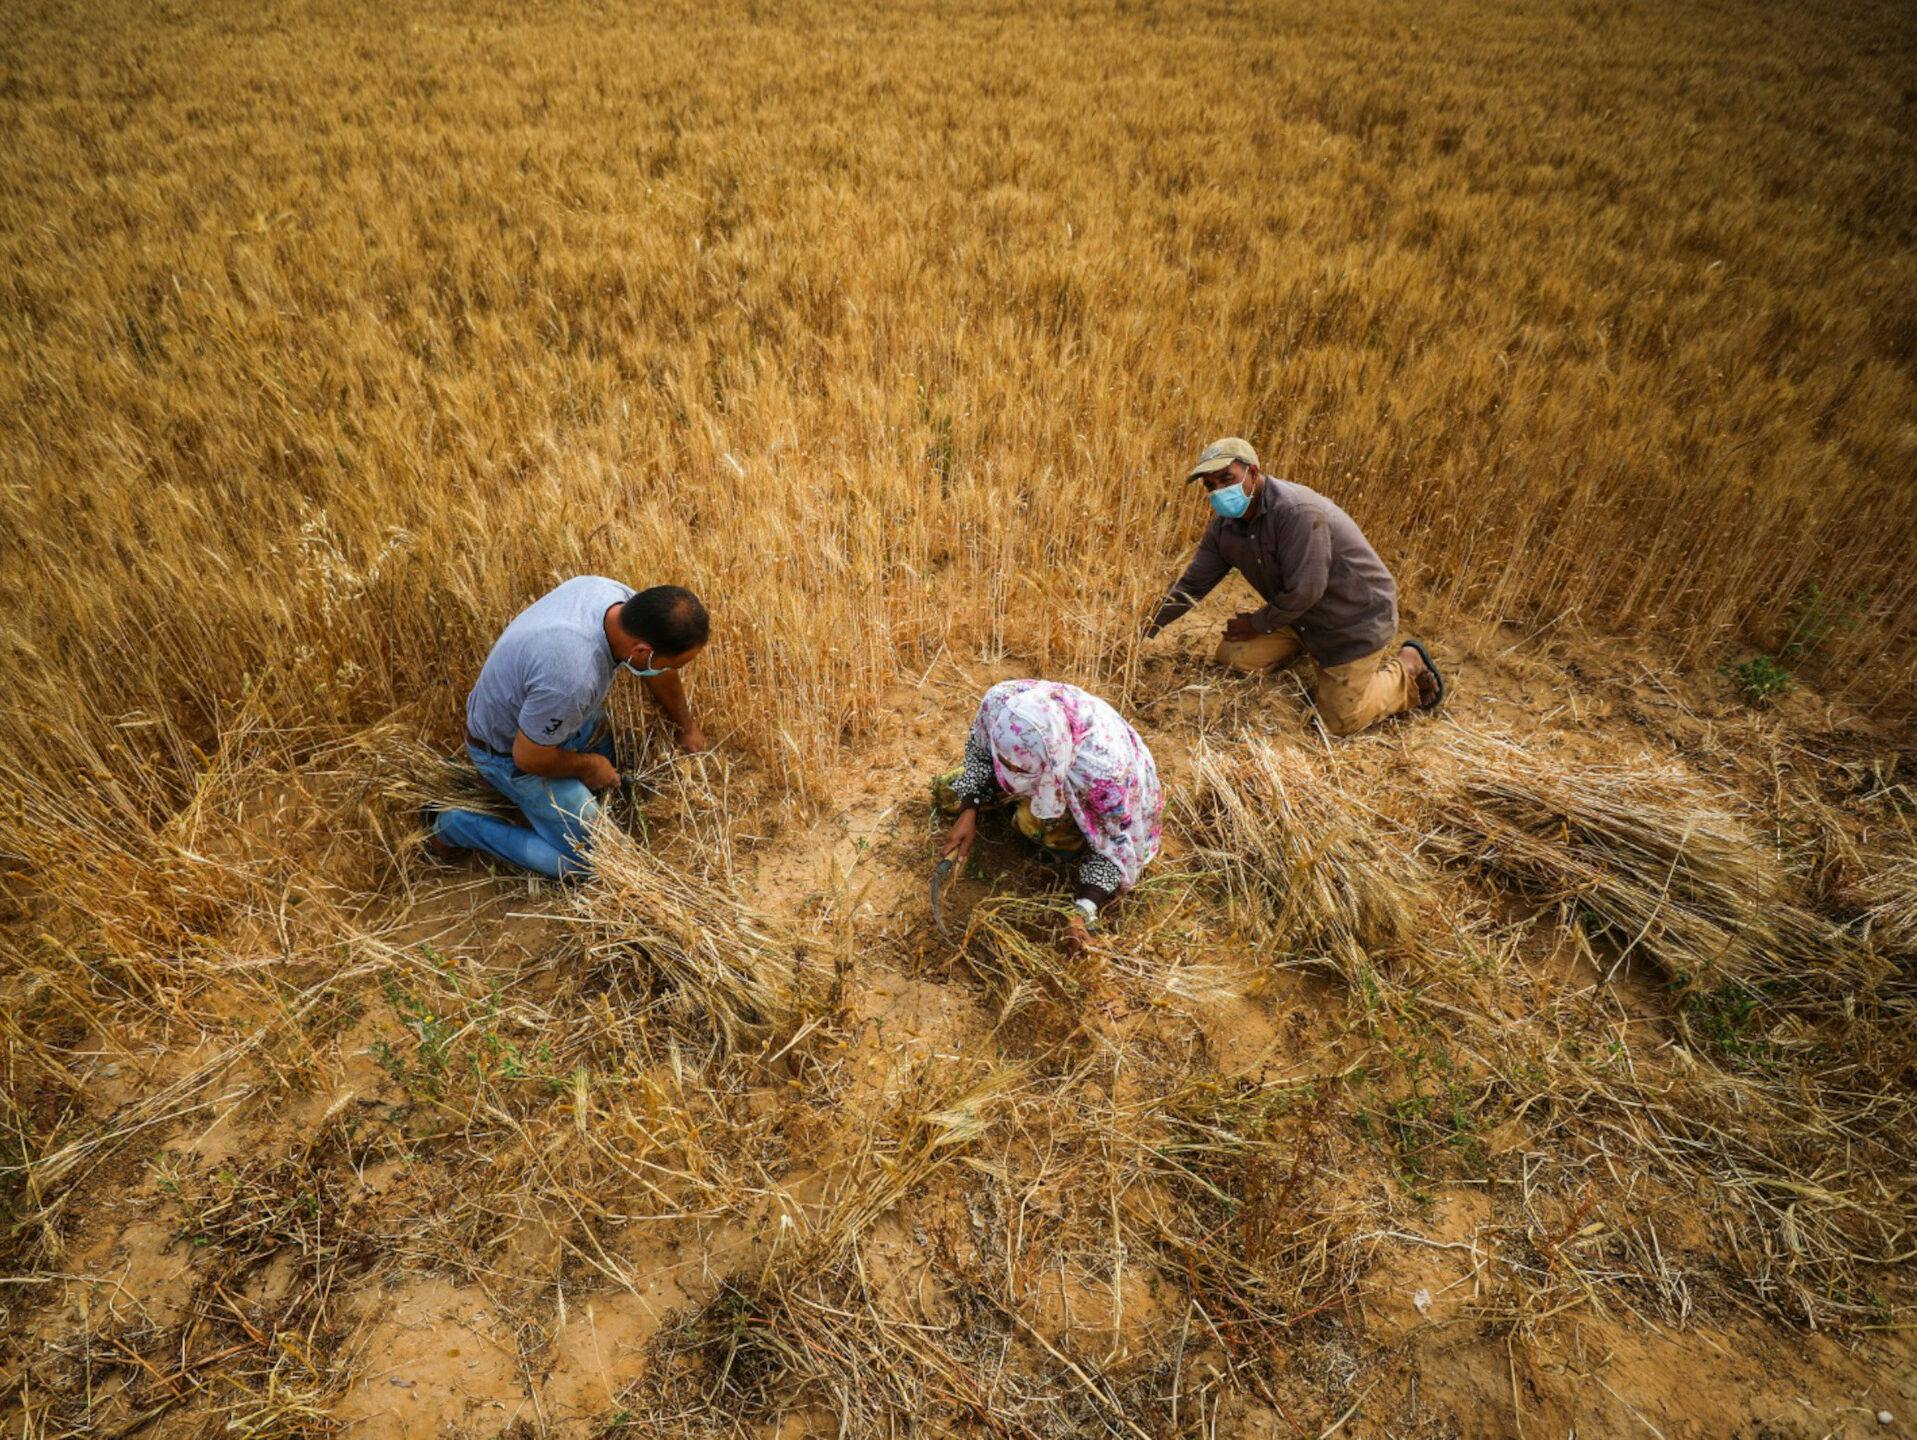 A group of people collecting grain on a field.